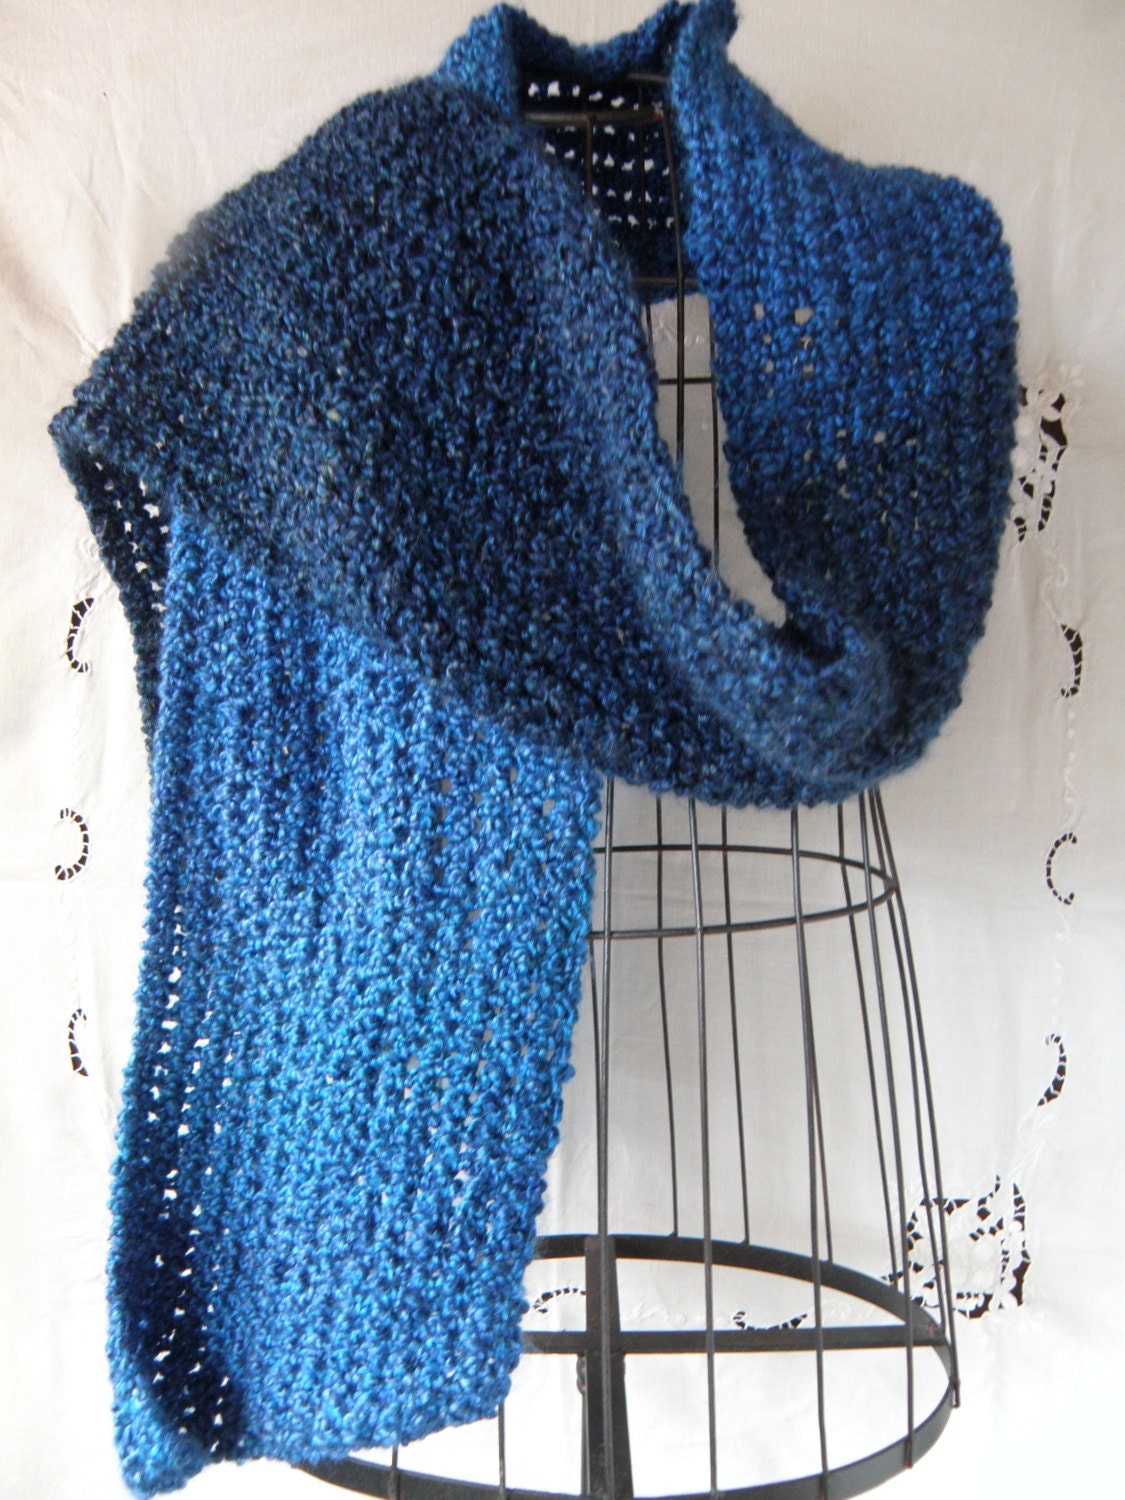 Hand Knit Extra Long Scarf/ Super Soft Scarf Hand Knit in Blue Yarn - Etsy